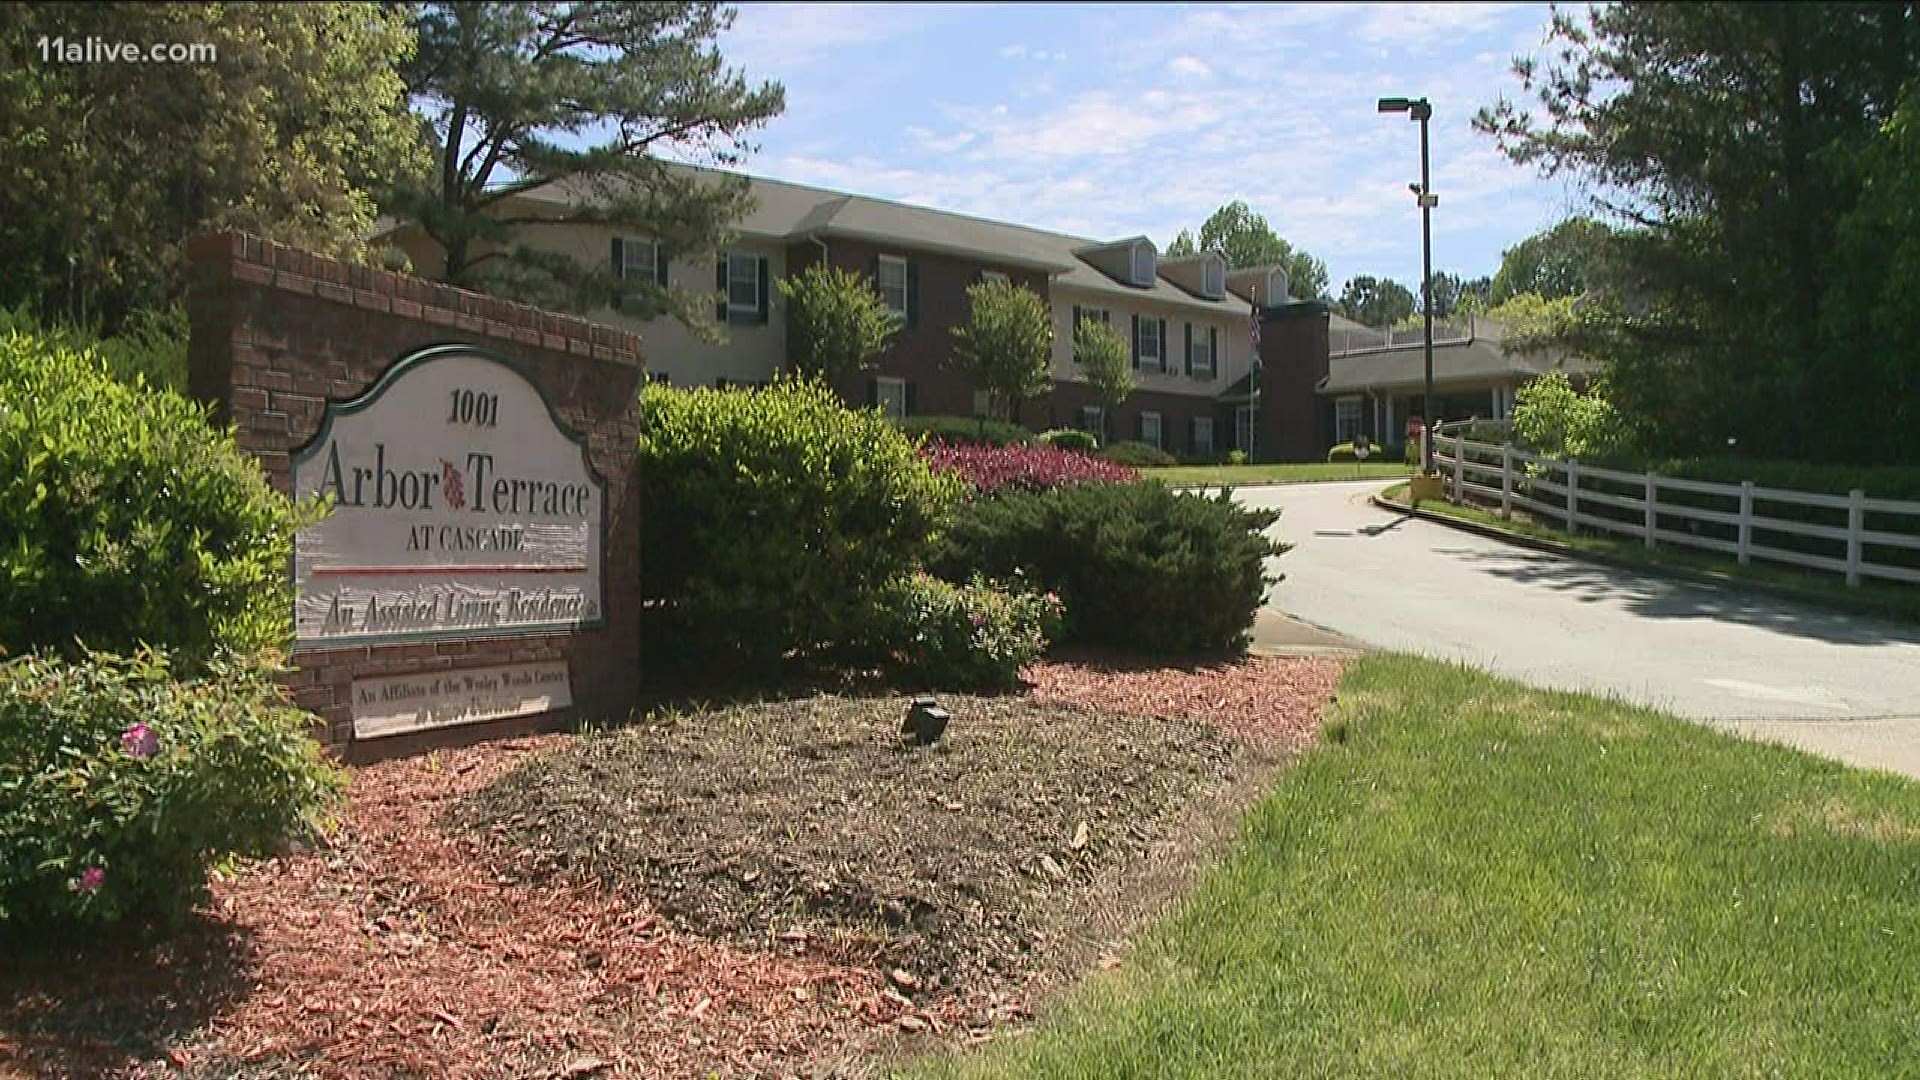 The virus is moving quickly through some of our state's long term care facilities.